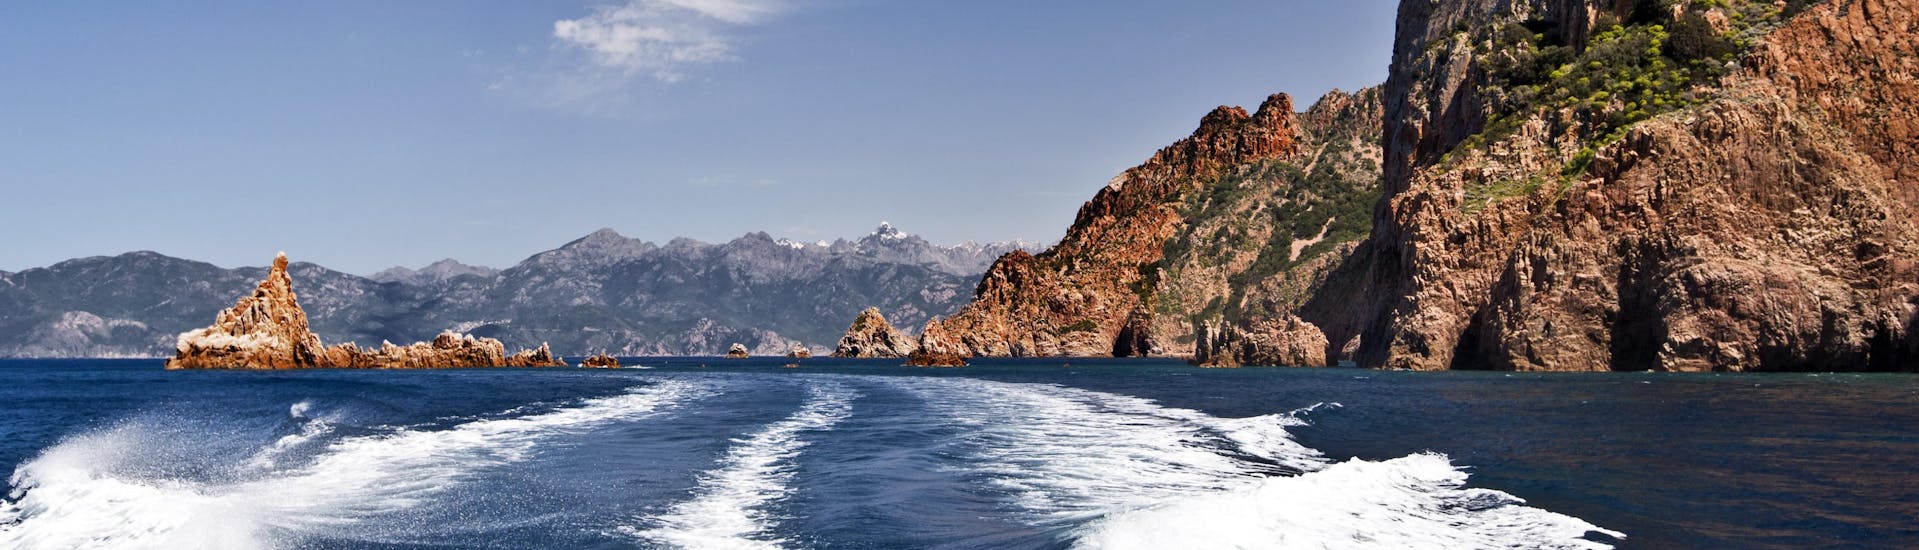 View from the back of a boat during a boat trip from Cargèse to the impressive Calanques de Piana on the west coast of Corsica.